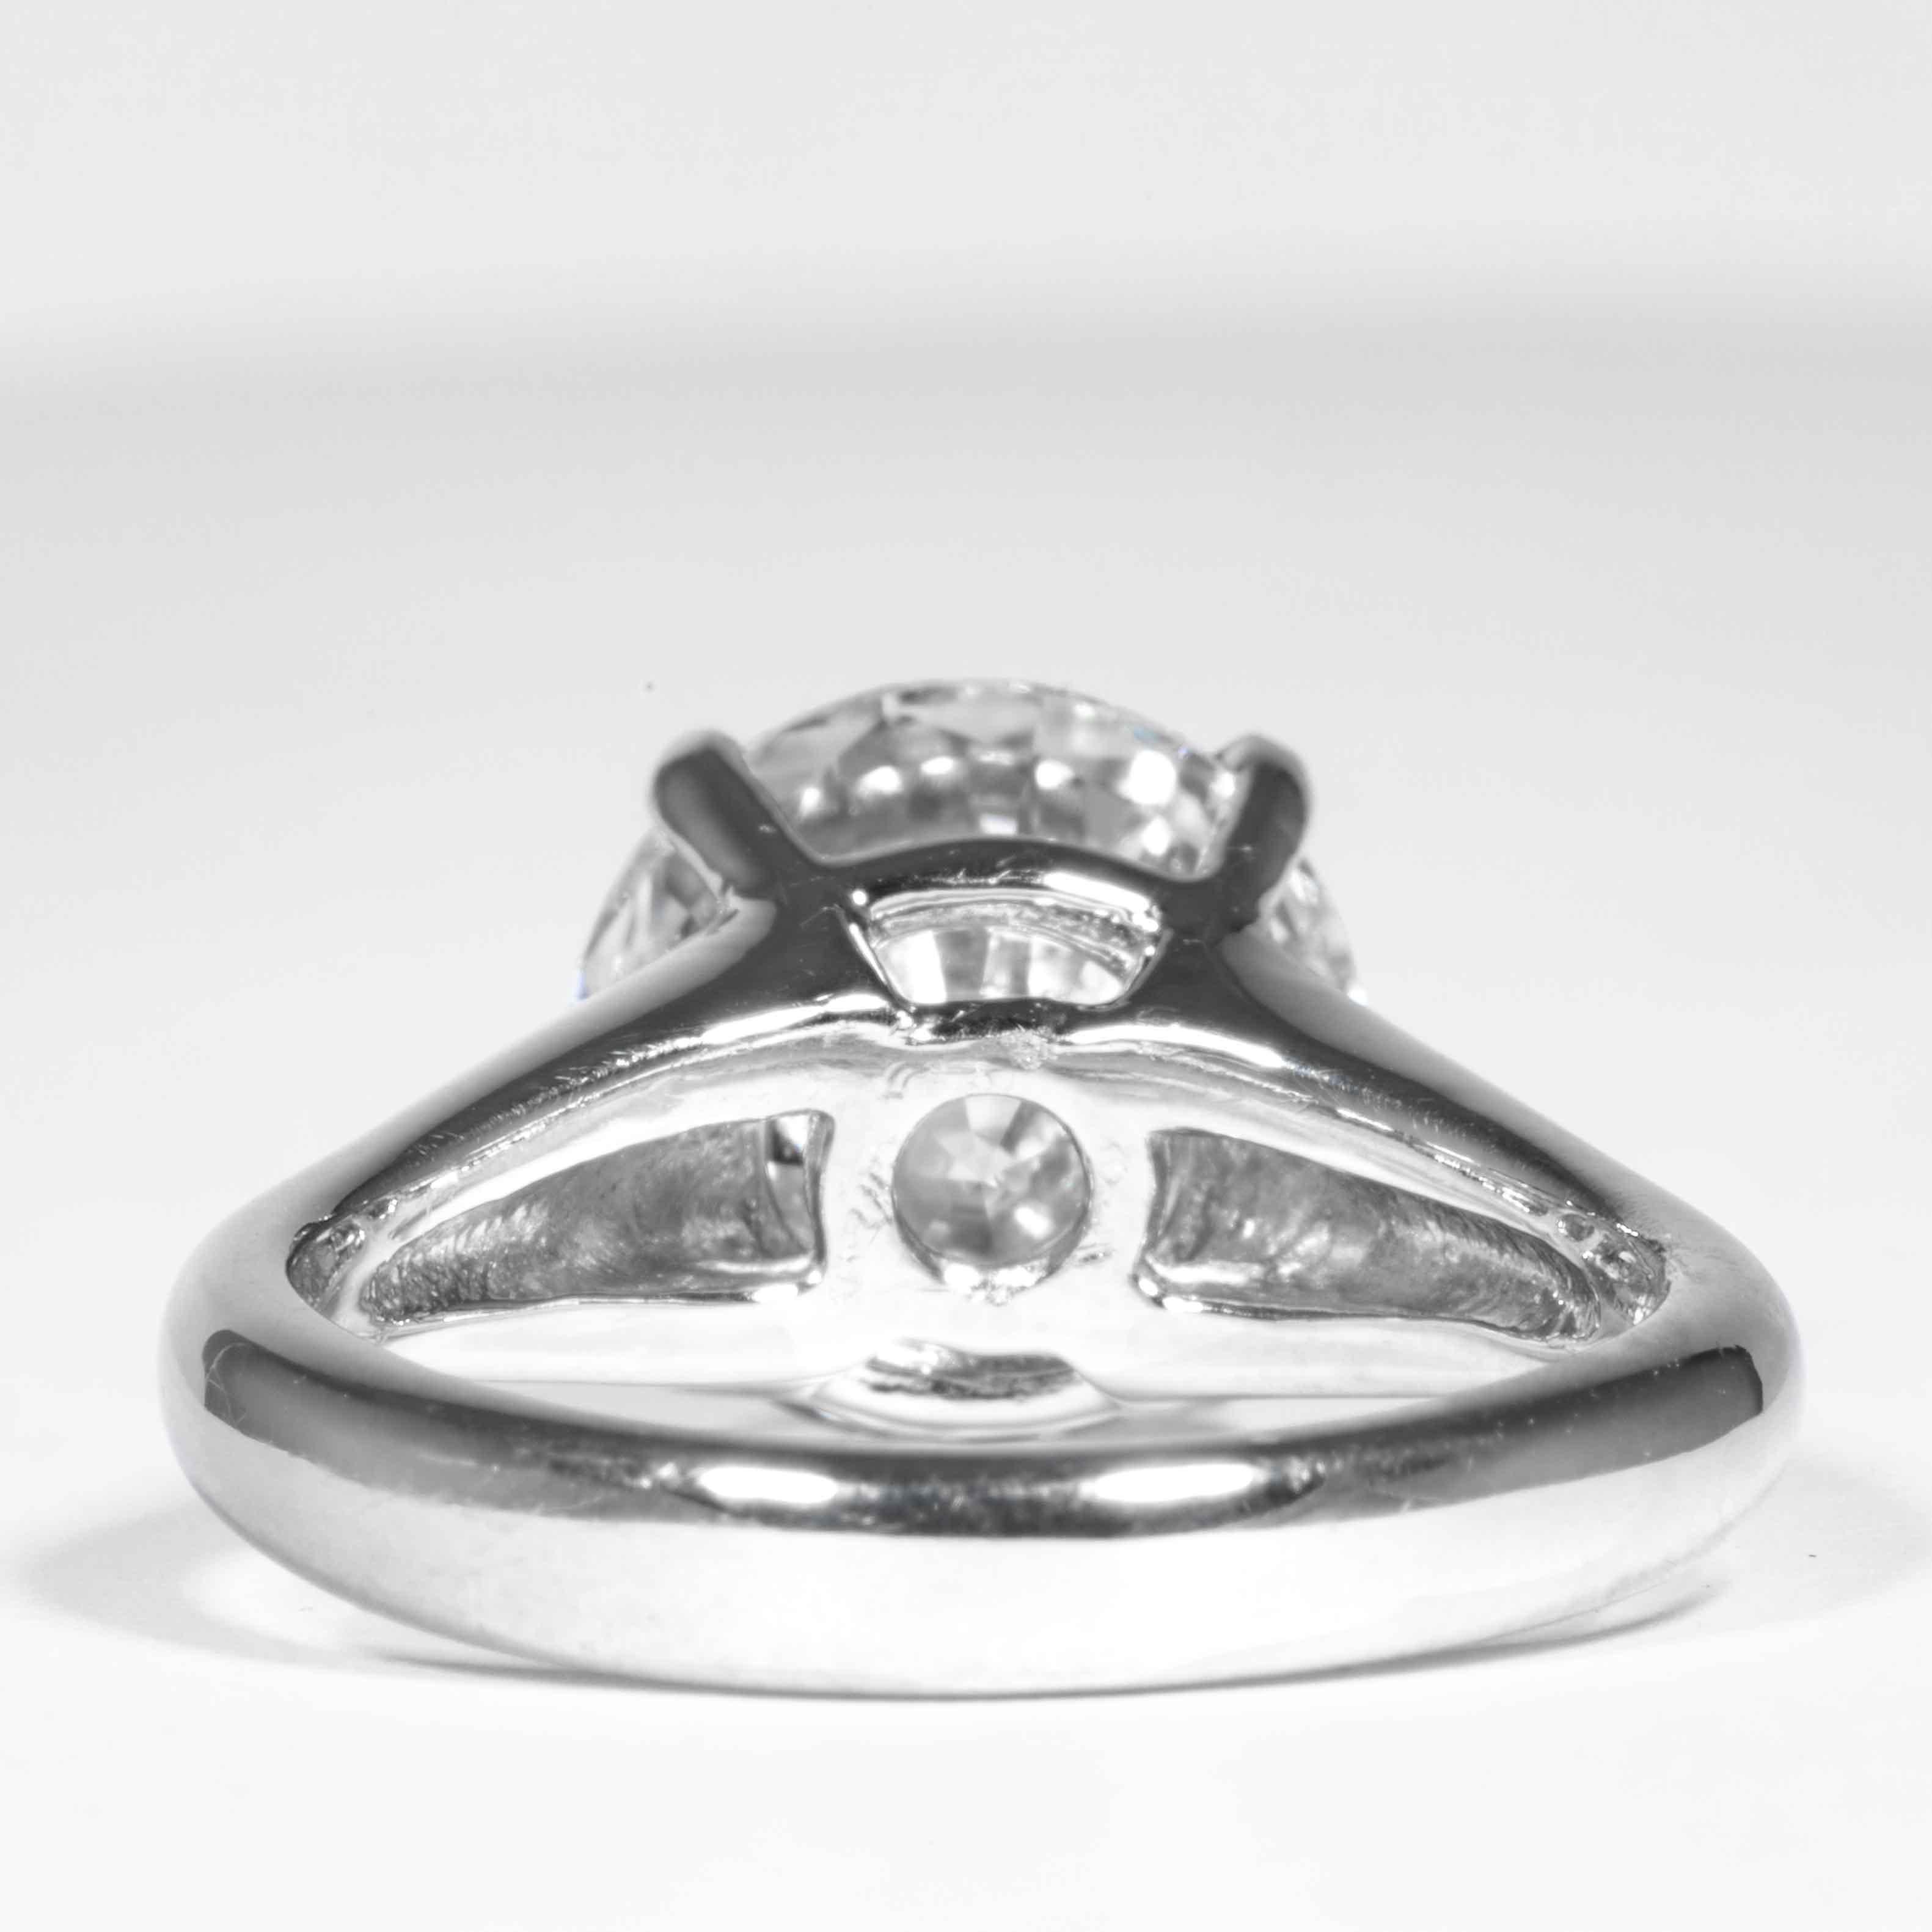 Women's Shreve, Crump & Low GIA Certified 4.26 Carat H SI1 Round Brilliant Diamond Ring For Sale